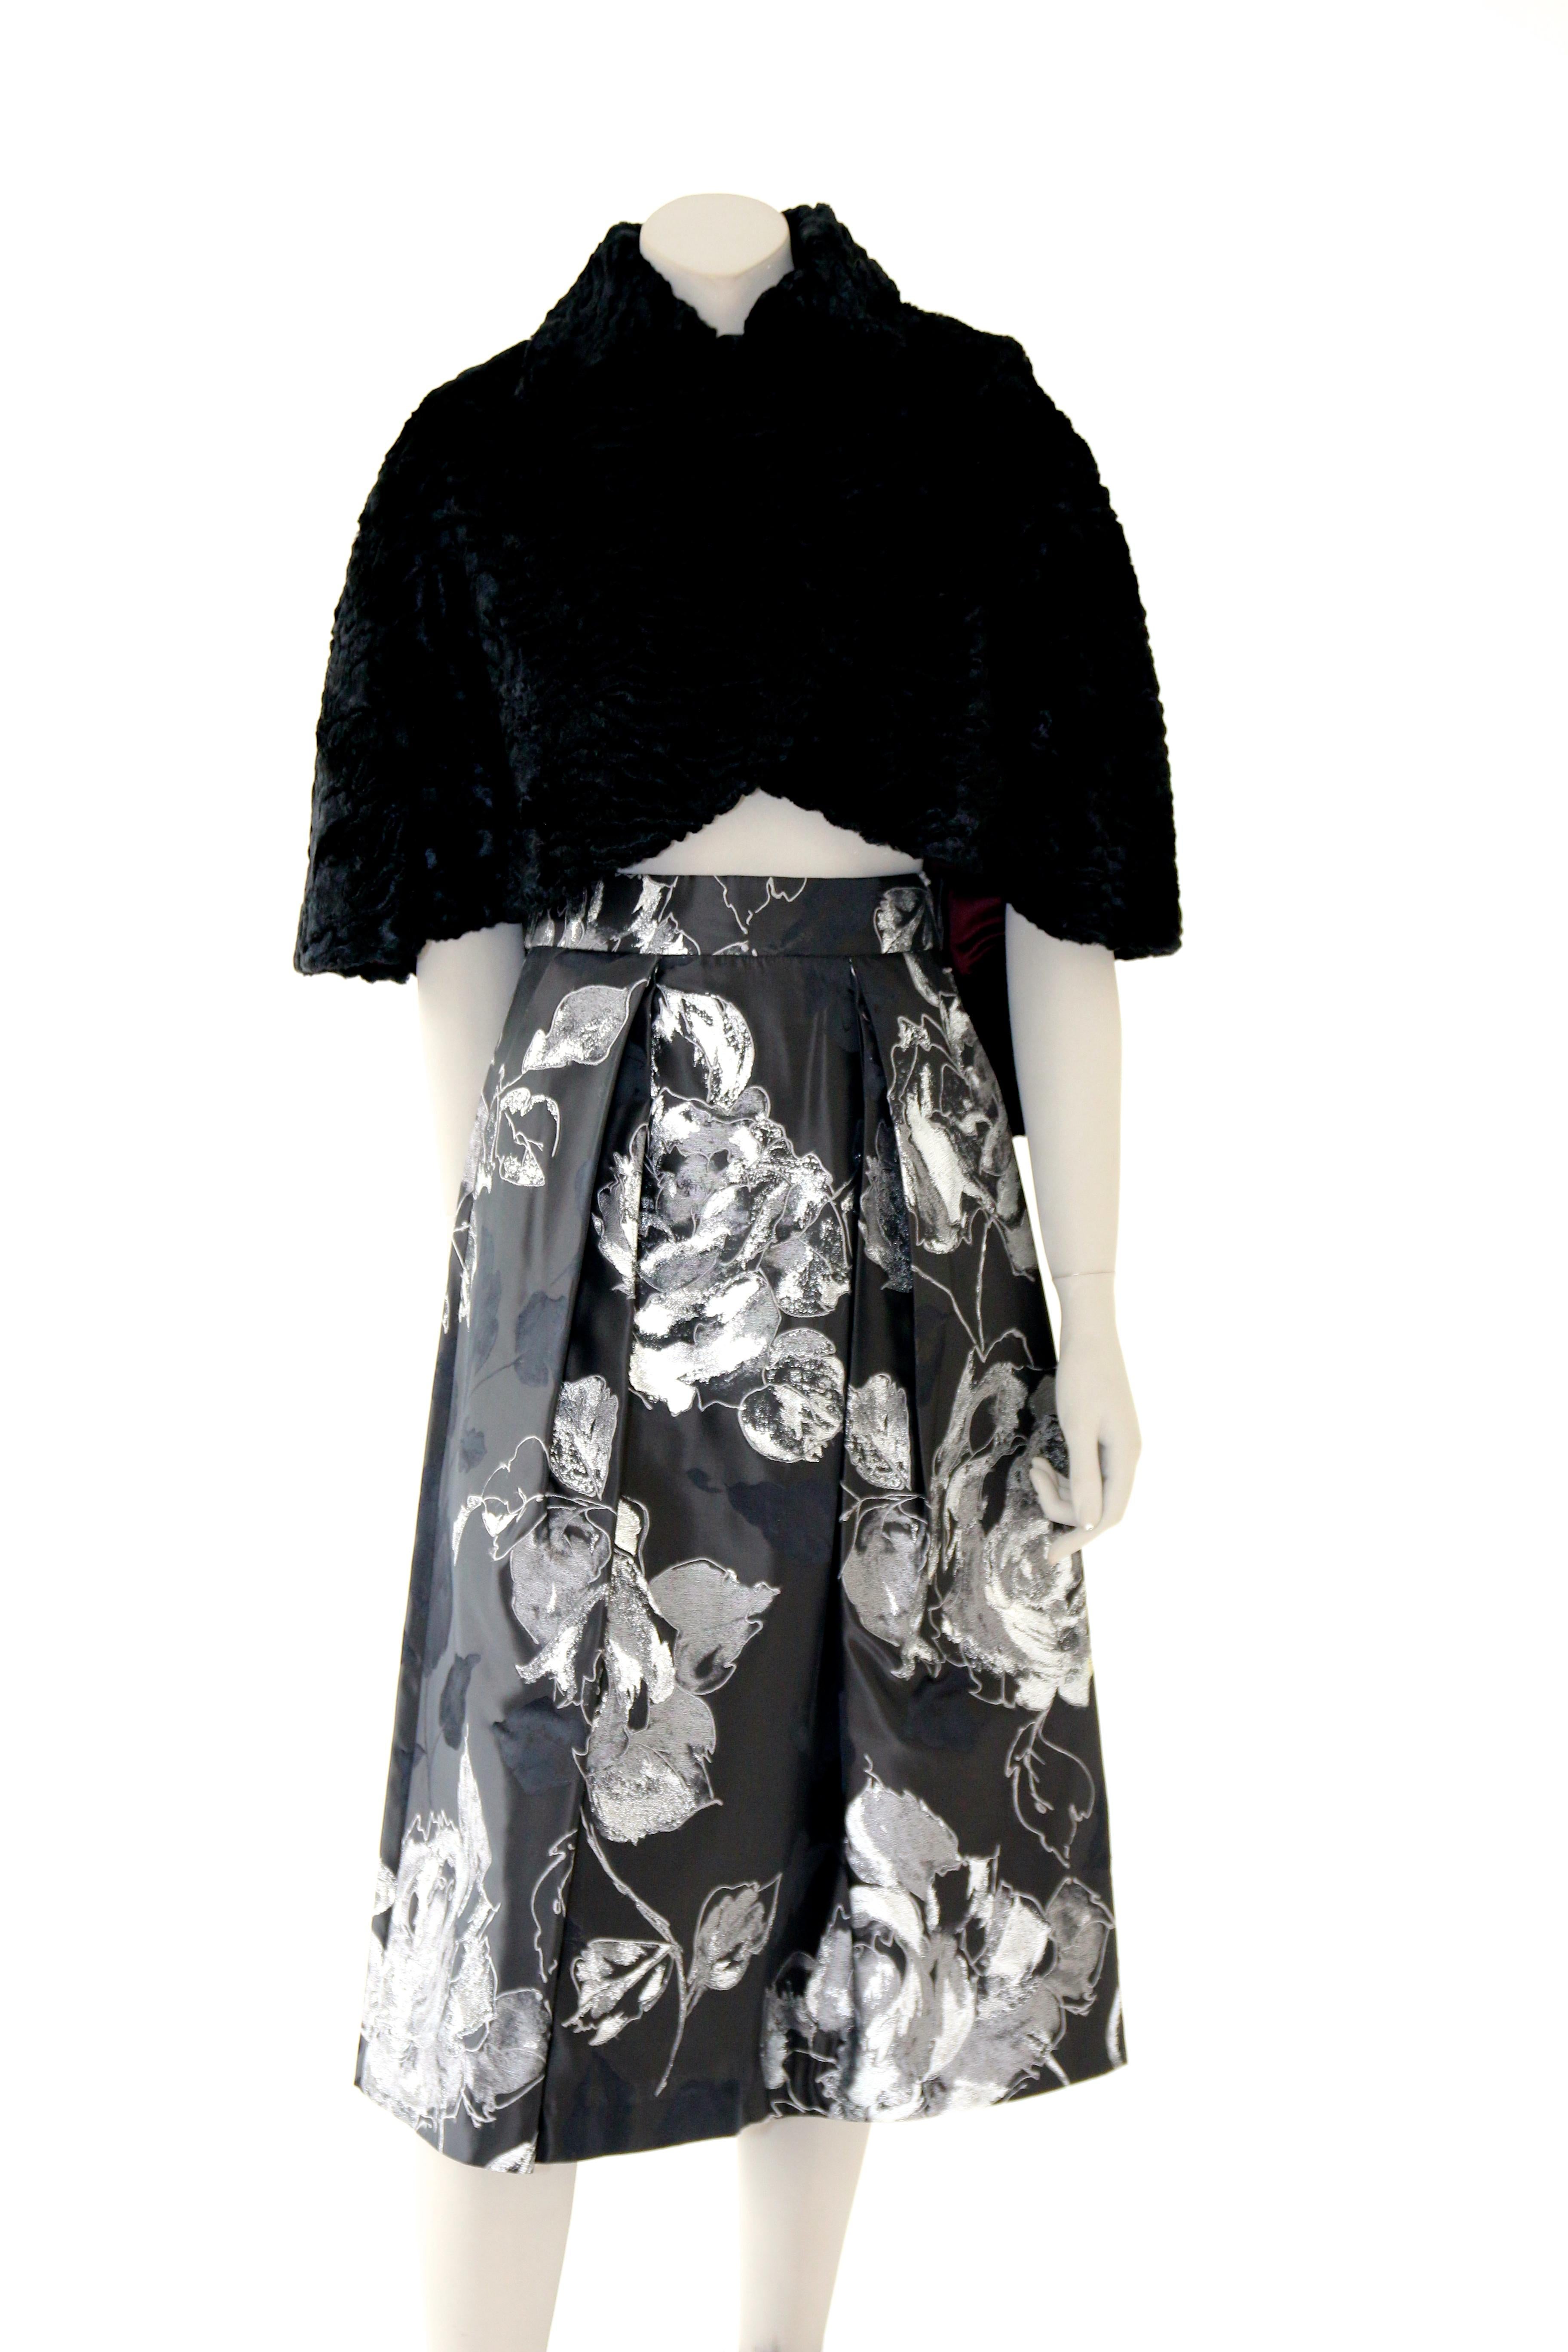 Pelush Black Astrakhan Faux Fur Cape With Tassels - Reversible S/M In New Condition For Sale In Greenwich, CT